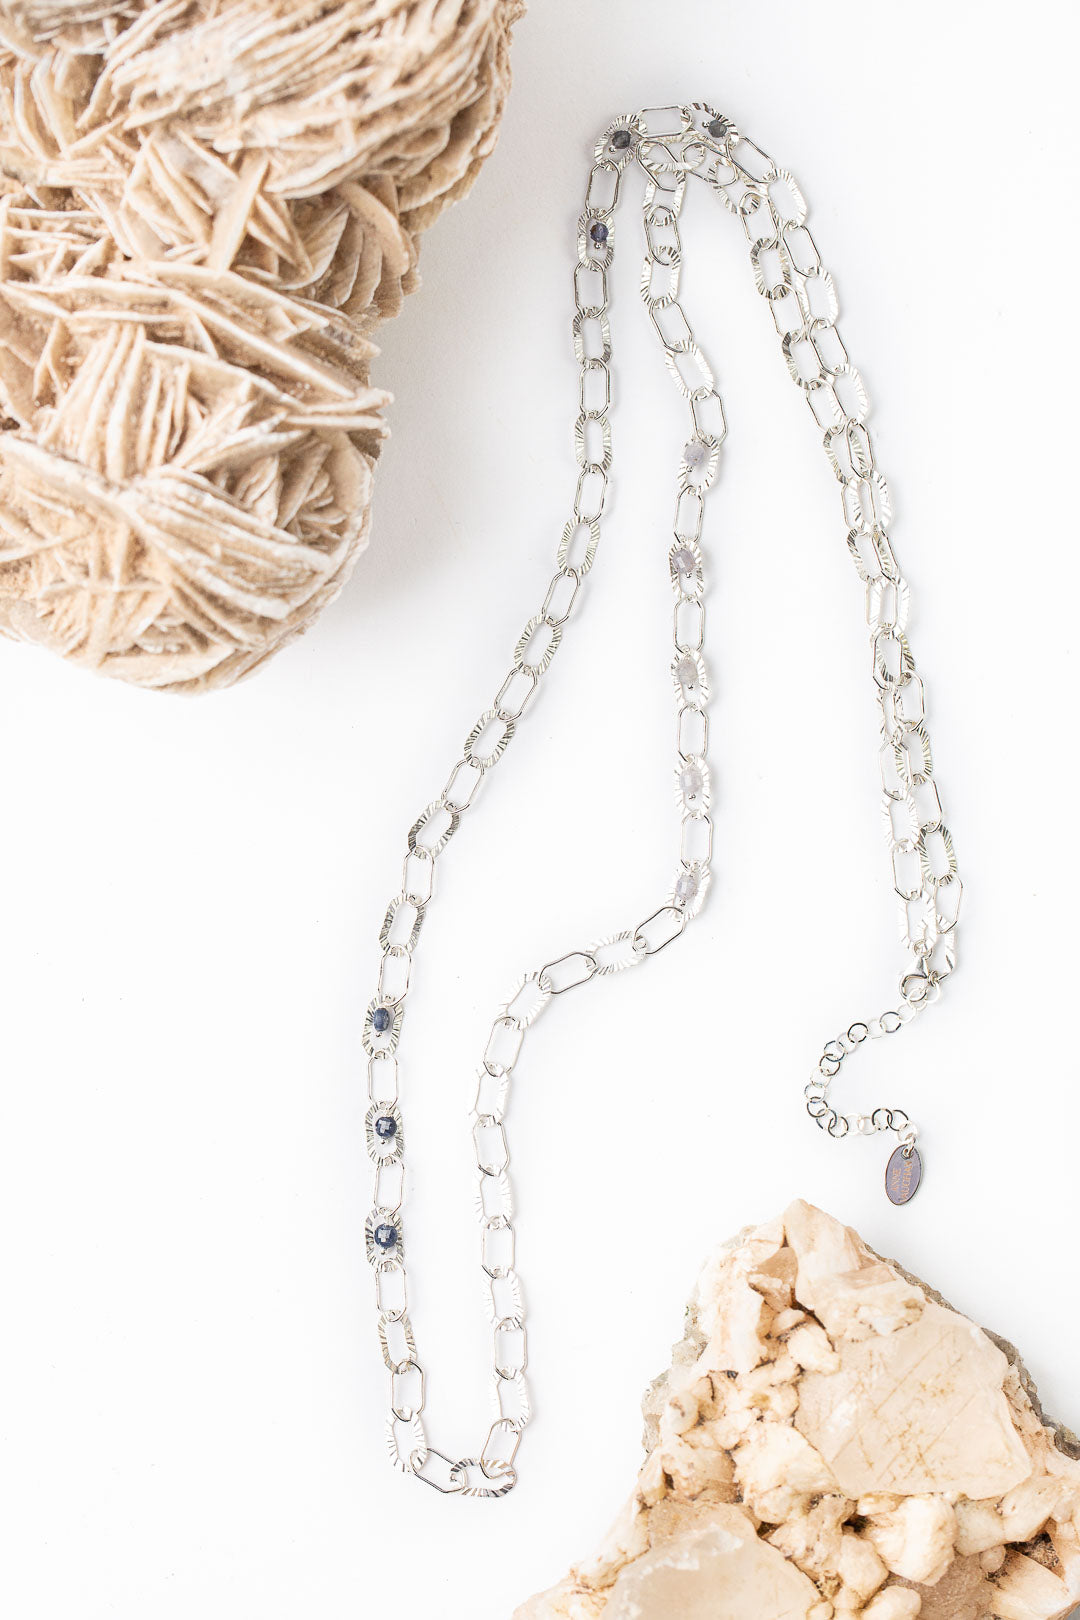 Ethereal 35-37" Iolite, Sodalite Simple Necklace